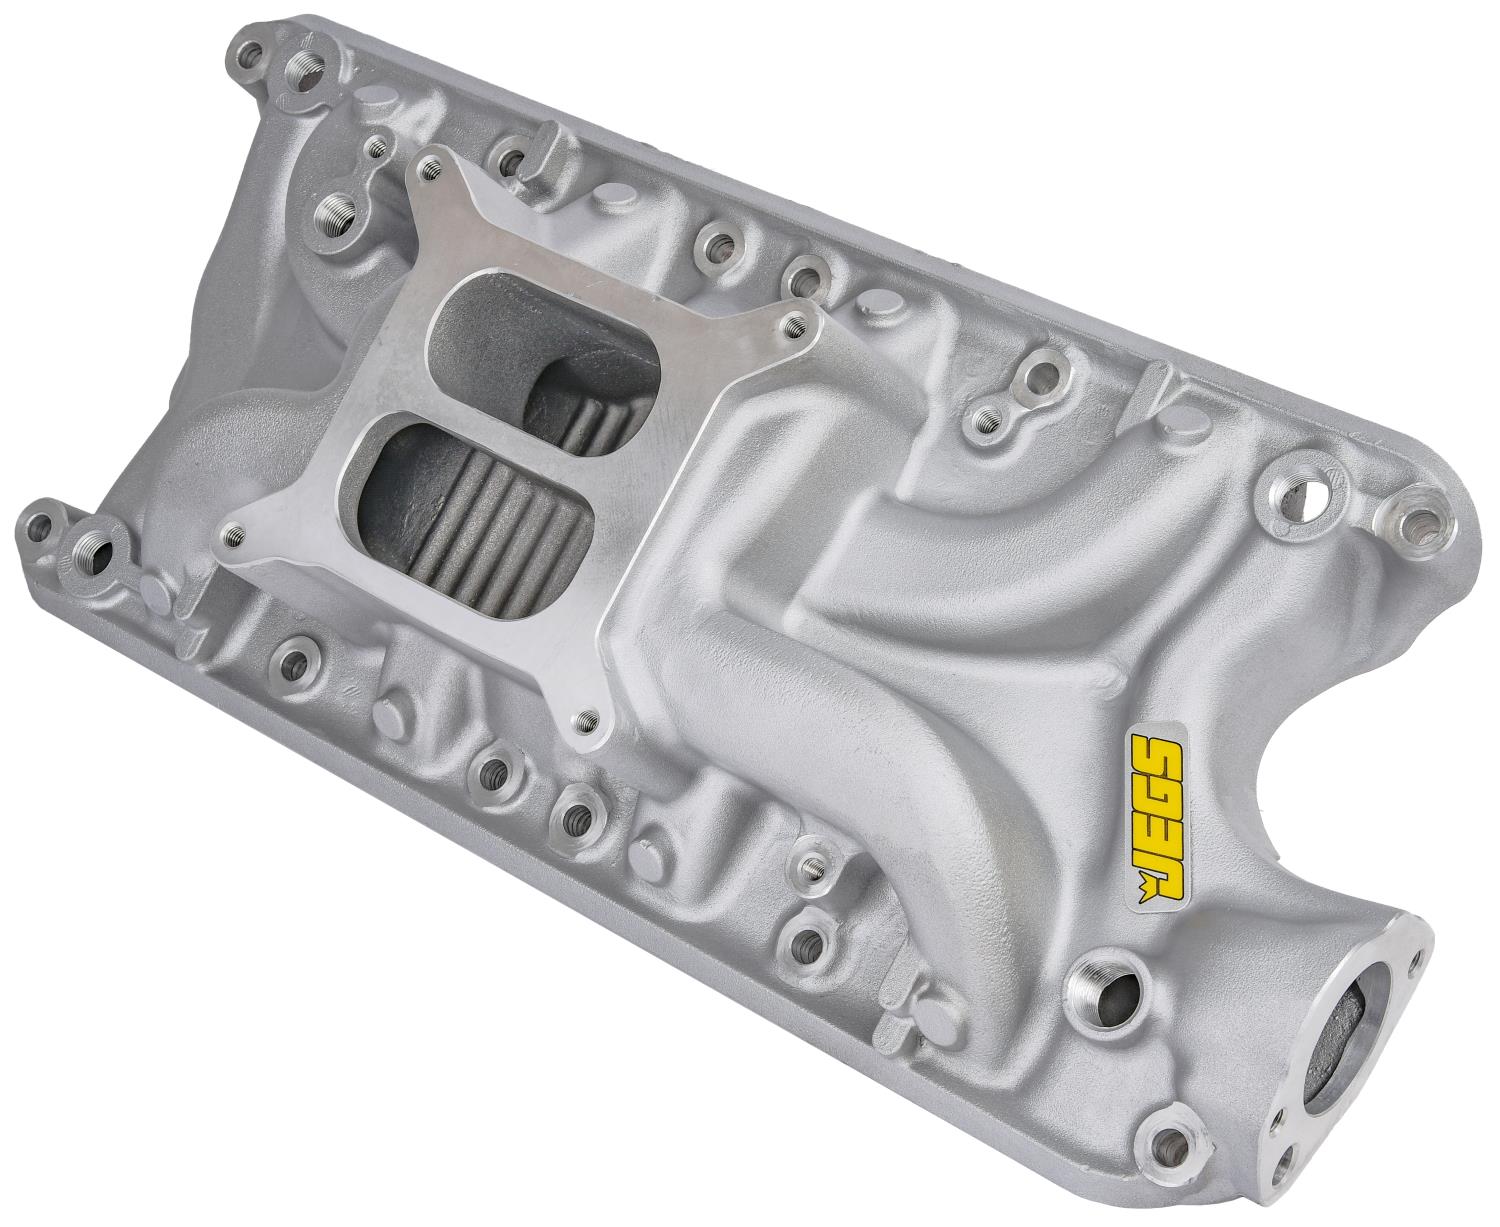 Intake Manifold for 1962-1985 Small Block Ford 260, 289 & 302 (Except Boss 302), Dual Plane [Satin]